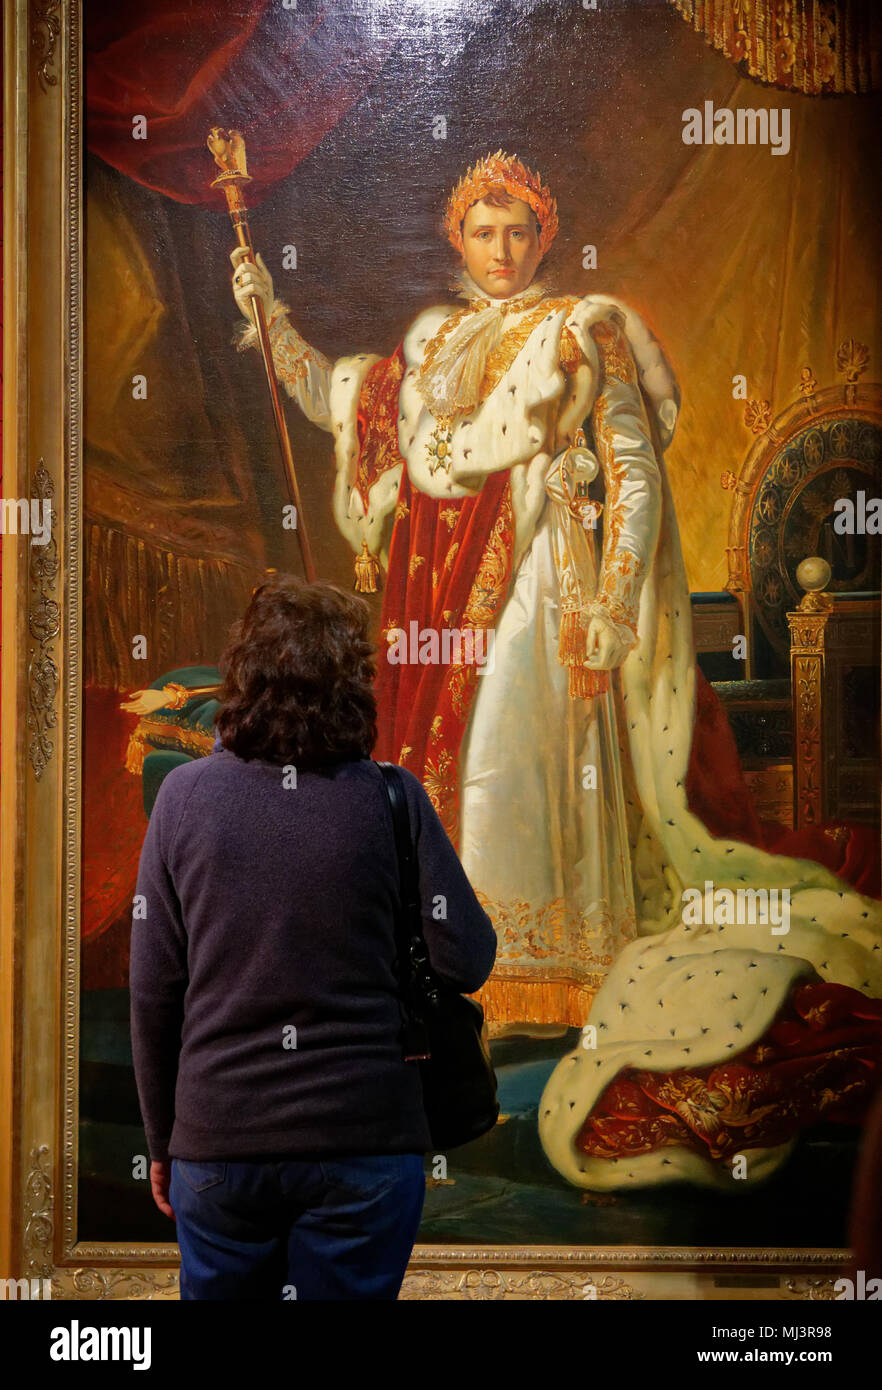 A lady  looking at a large formal portrait of Napoleon in Ceremonial robes in the throne room of the Palais des Tuileries, by Francois Pascal Gerard Stock Photo